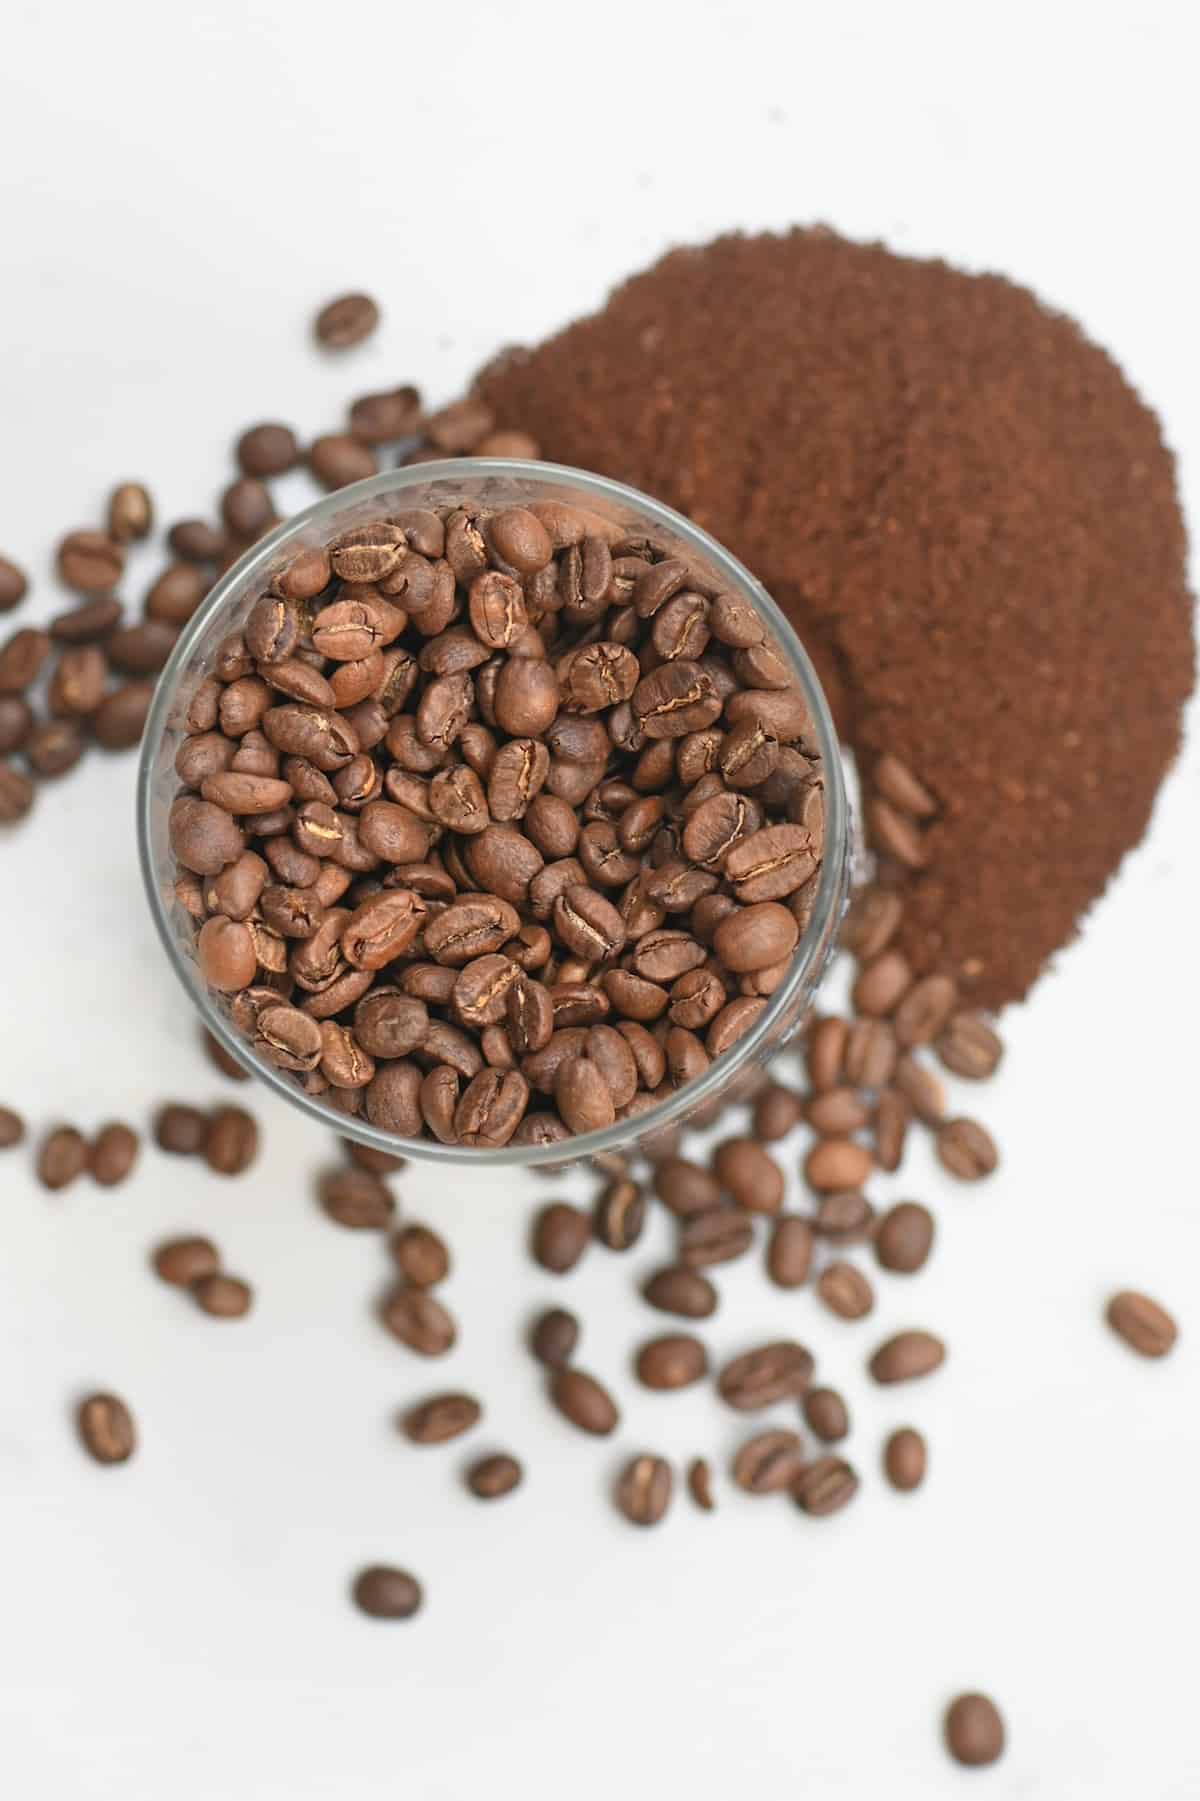 Coffee beans in a container and some ground coffee next to it